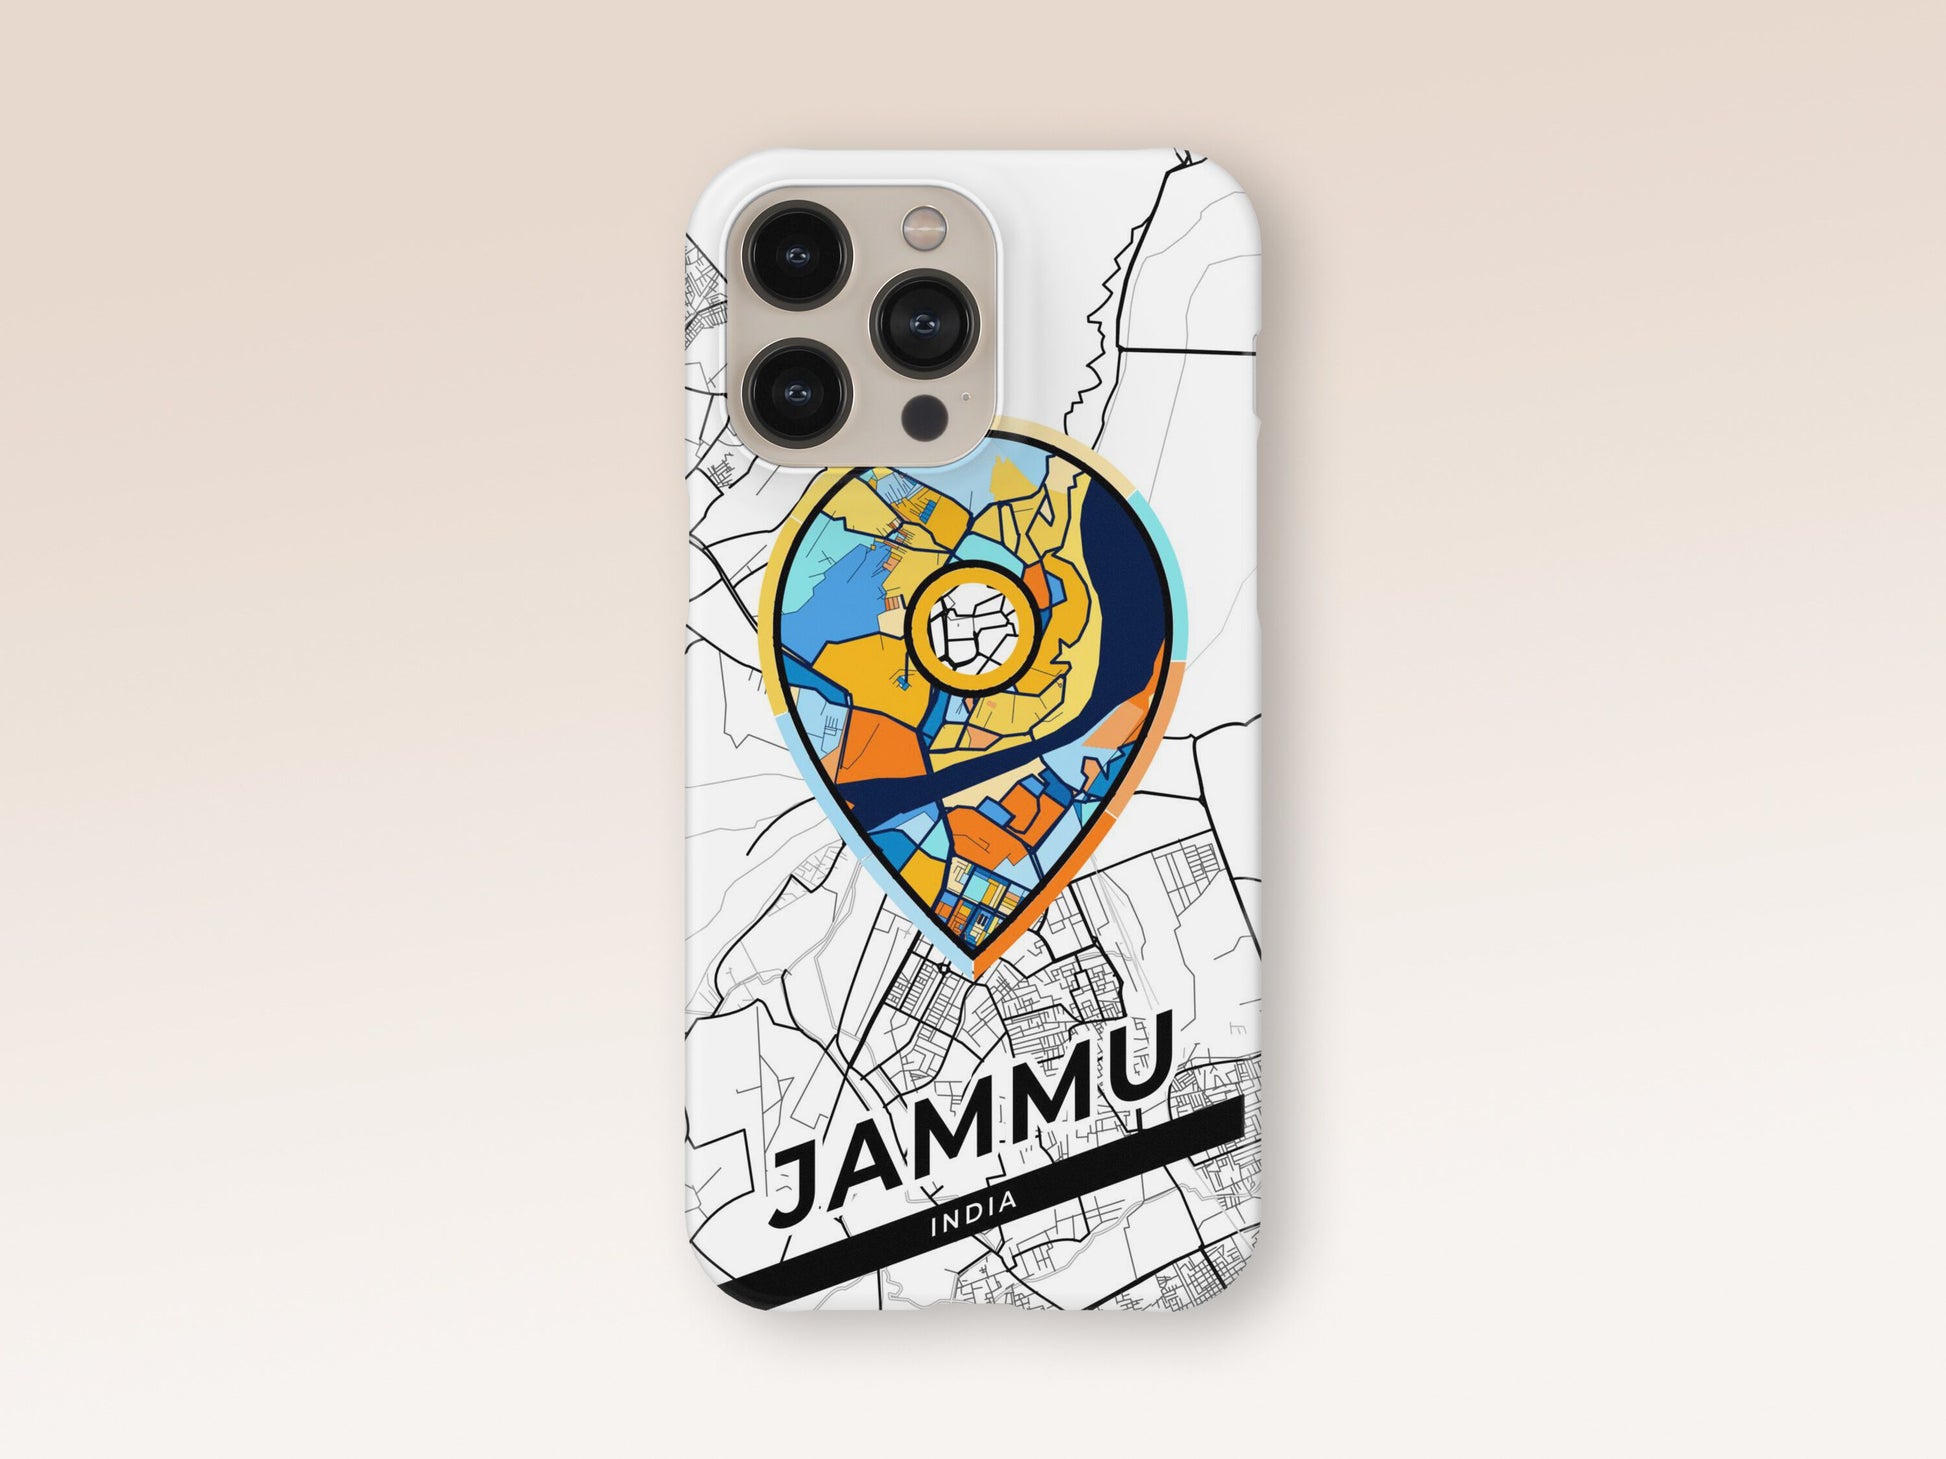 Jammu India slim phone case with colorful icon. Birthday, wedding or housewarming gift. Couple match cases. 1